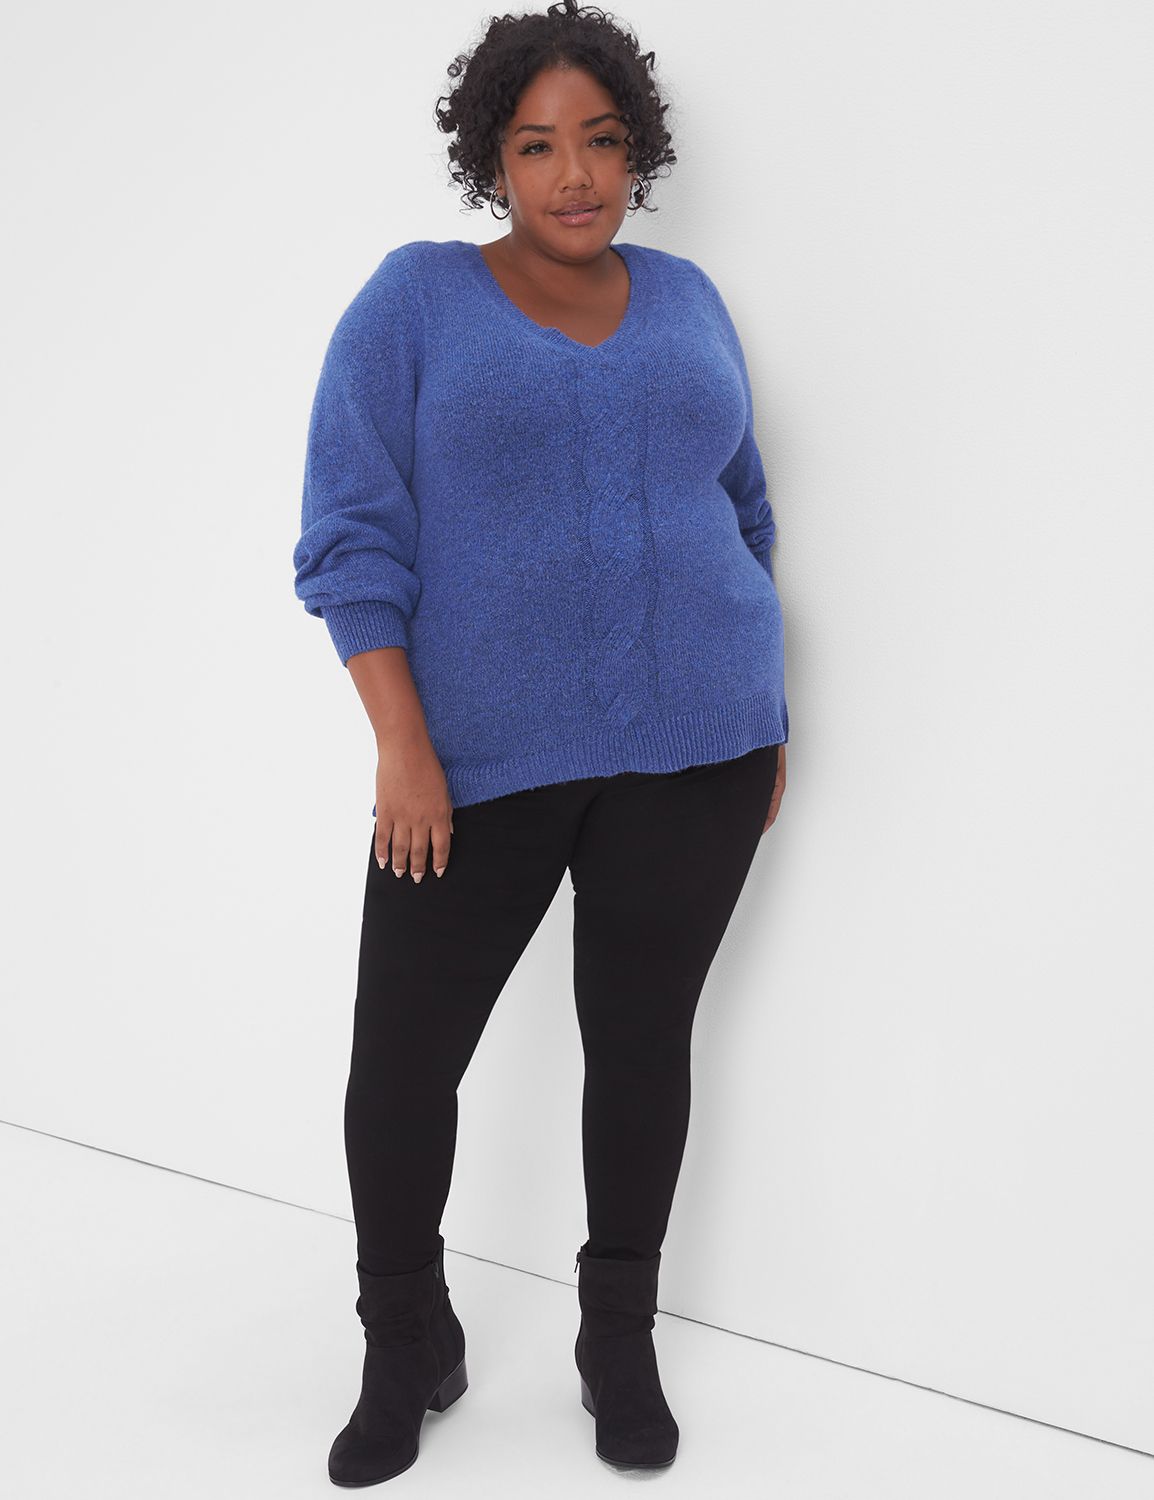 Lane Bryant Classic Tunic Pullover Cable Knit Sweater 18/20 Dazzling Blue